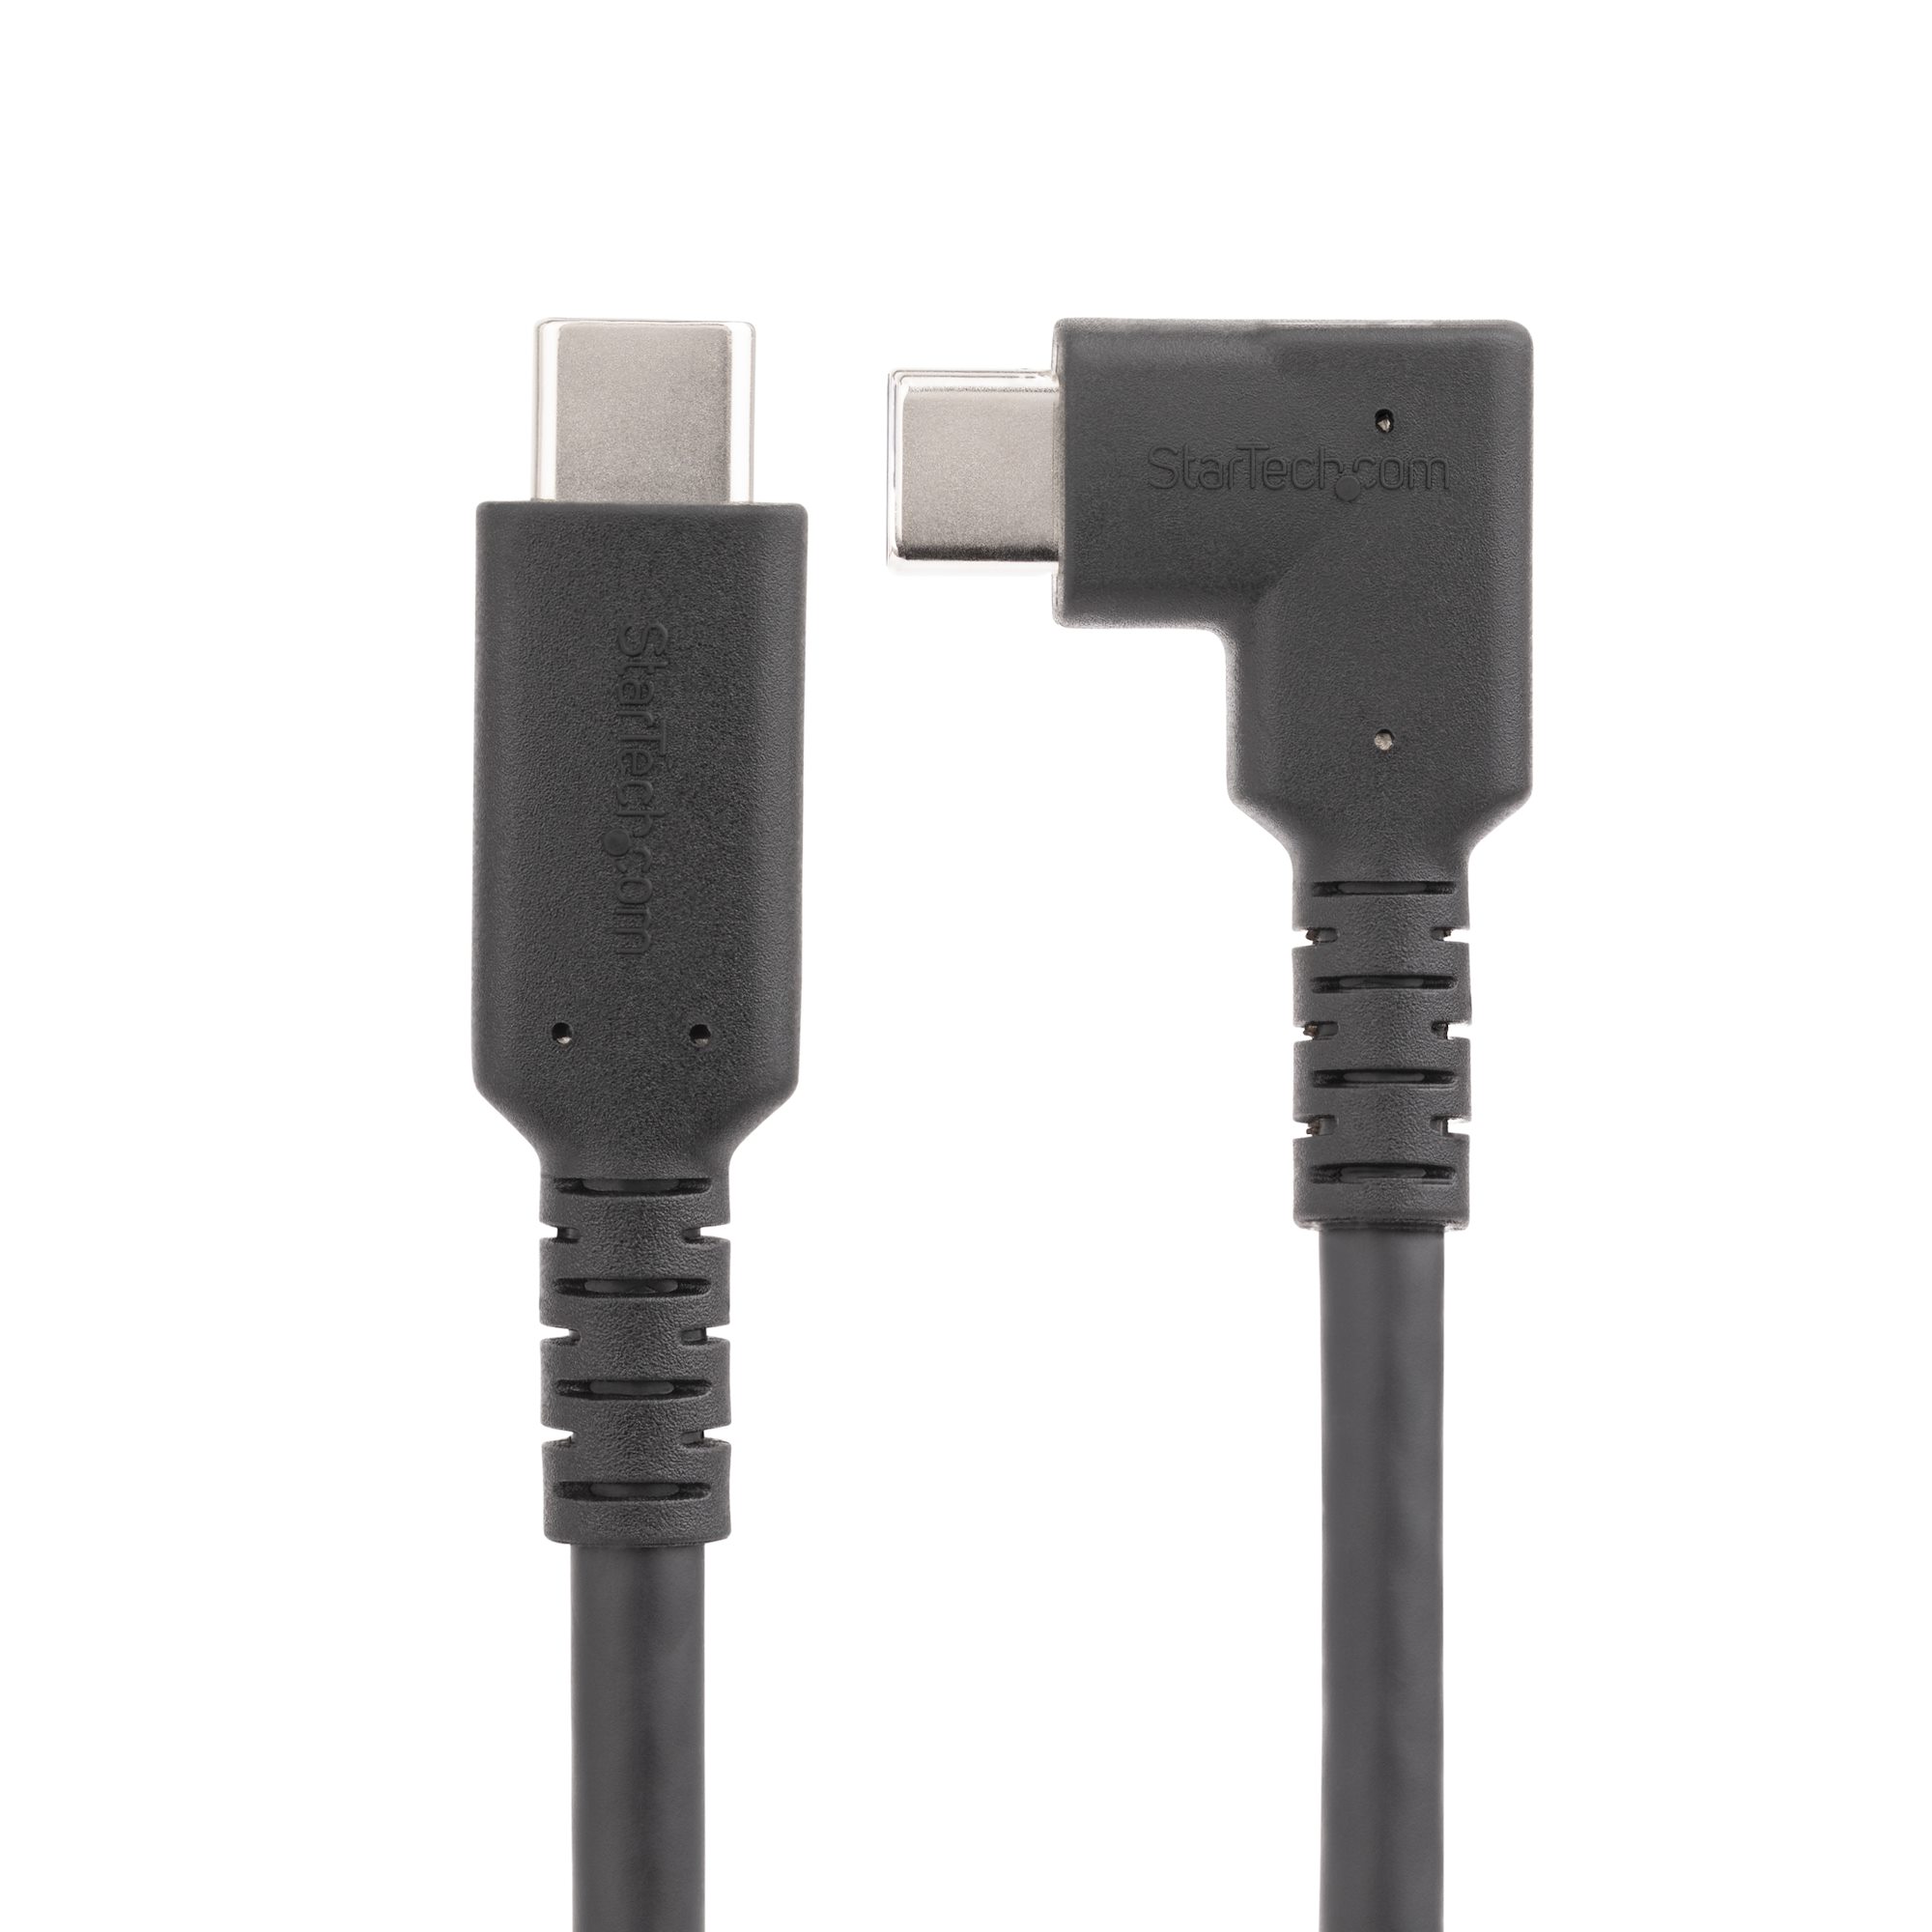 USB 3.1 Type-C to USB Right Angle Cable (3m, Up/Down Angle